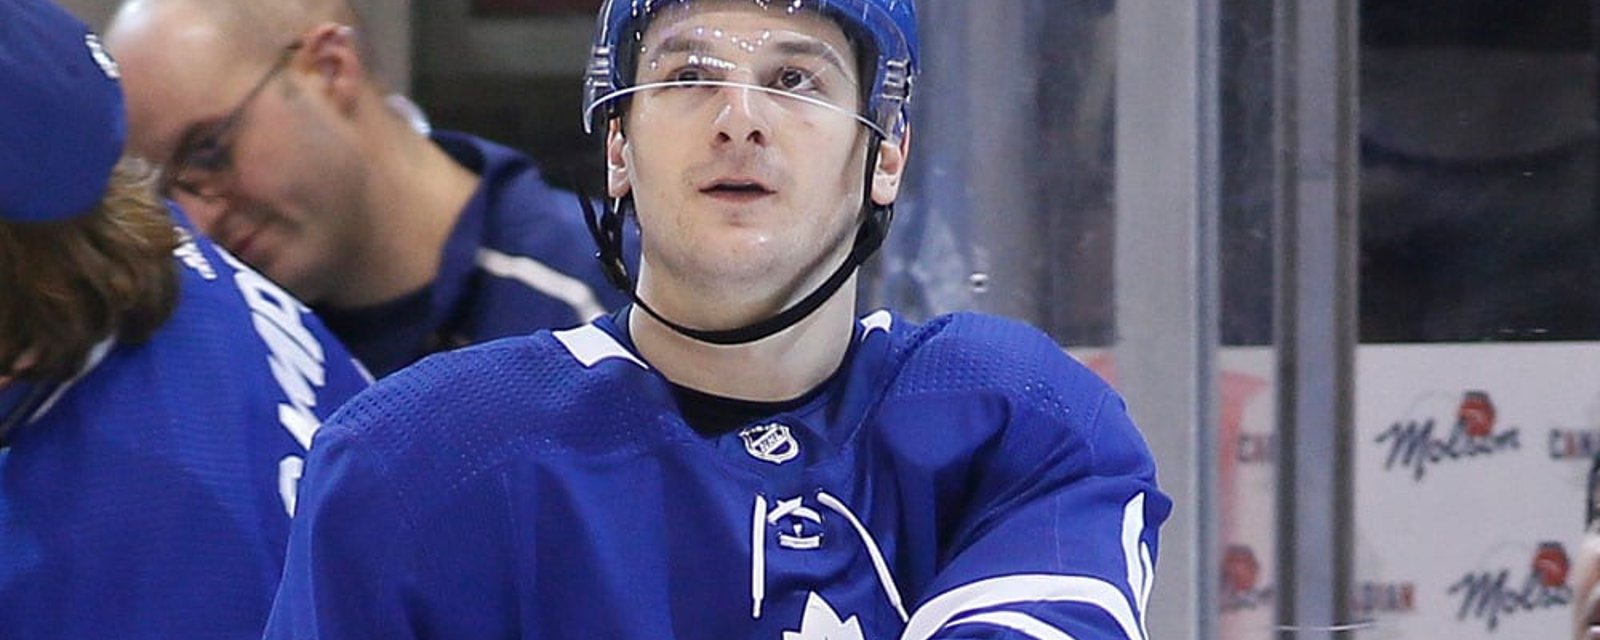 Zach Hyman turns down Maple Leafs’ first offer to return 